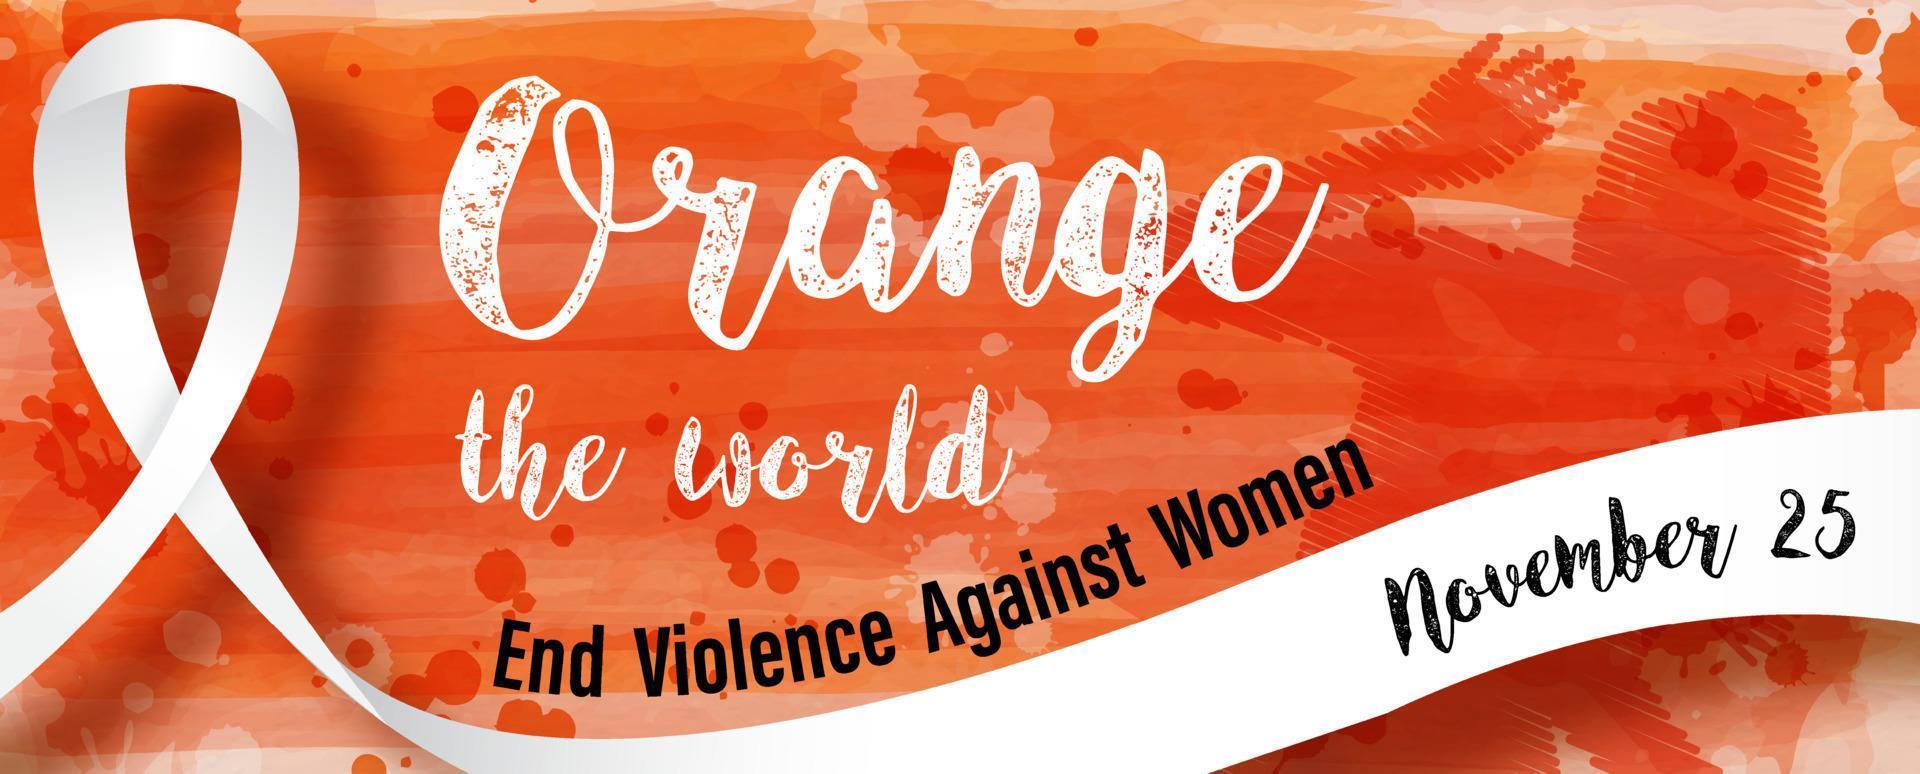 White ribbon with Orange the world letters and wording about International day for the elimination of Violence Against Women with slogan and the day of event in poster and vector design.